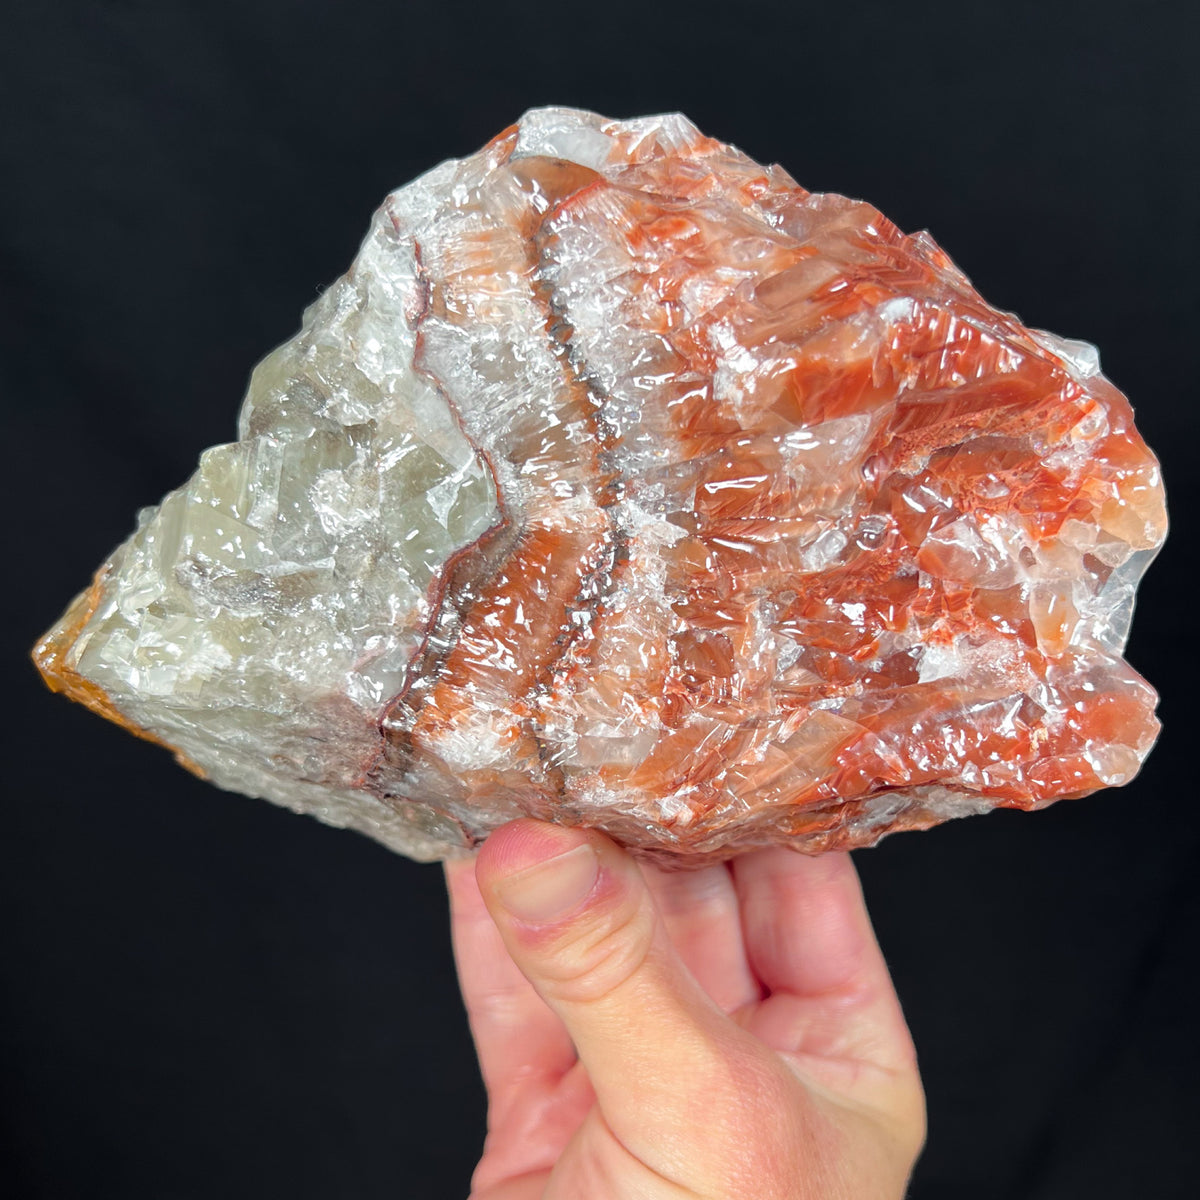 Red and Green Calcite Crystal Specimen